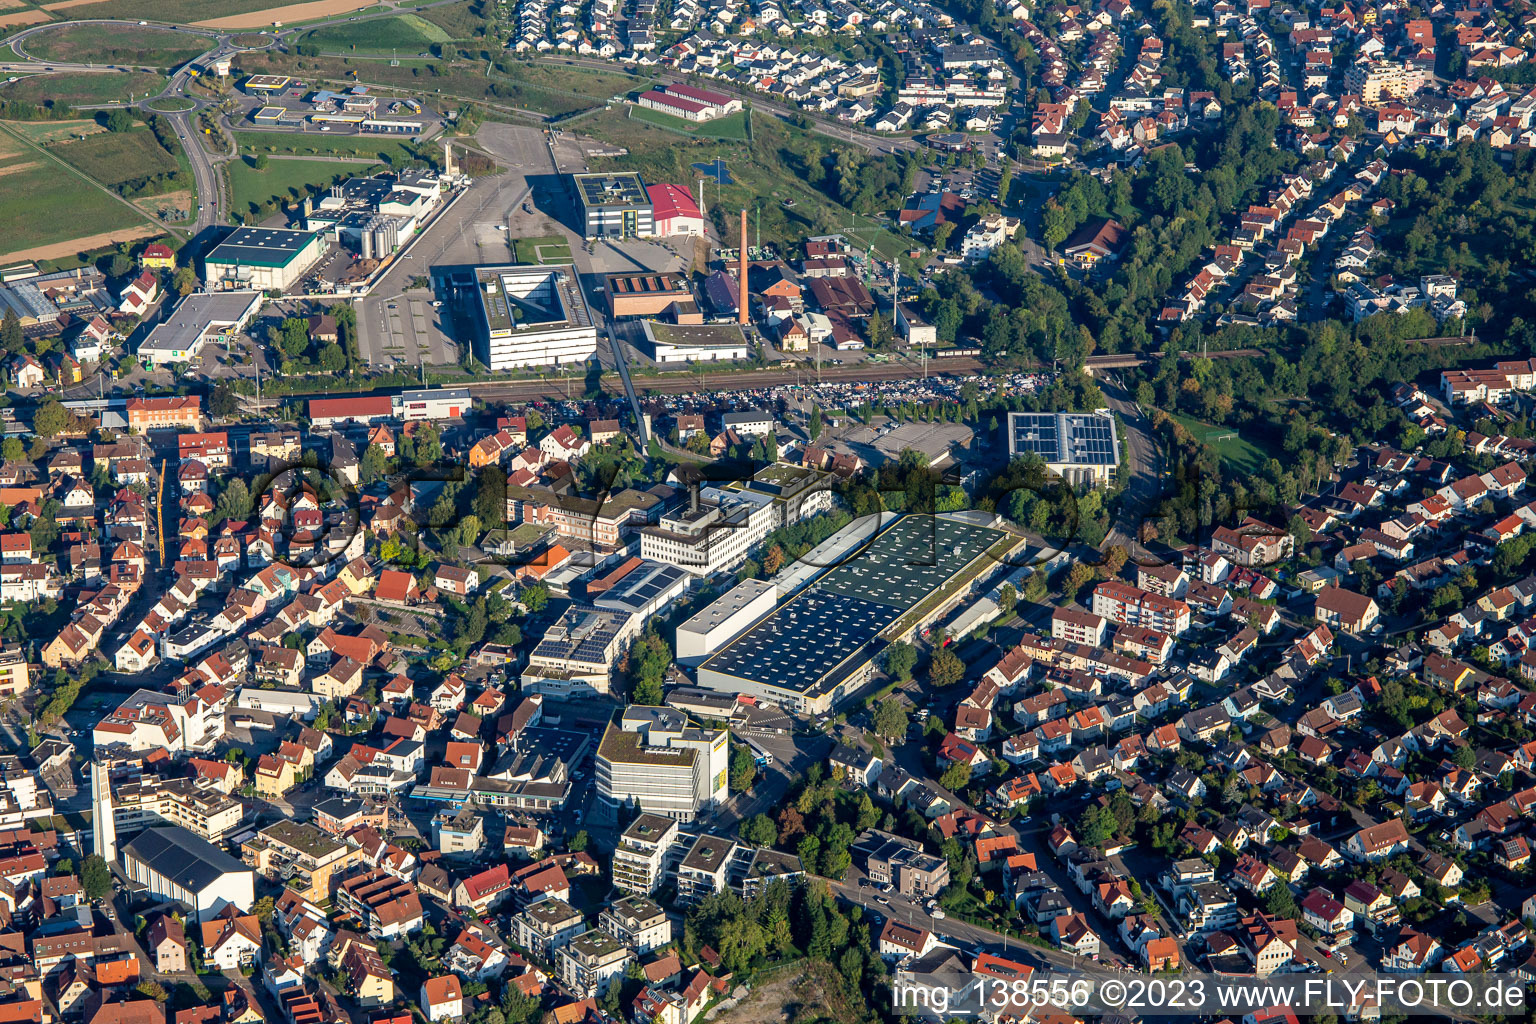 Aerial view of Alfred Kärcher GmbH & Co. KG in Winnenden in the state Baden-Wuerttemberg, Germany